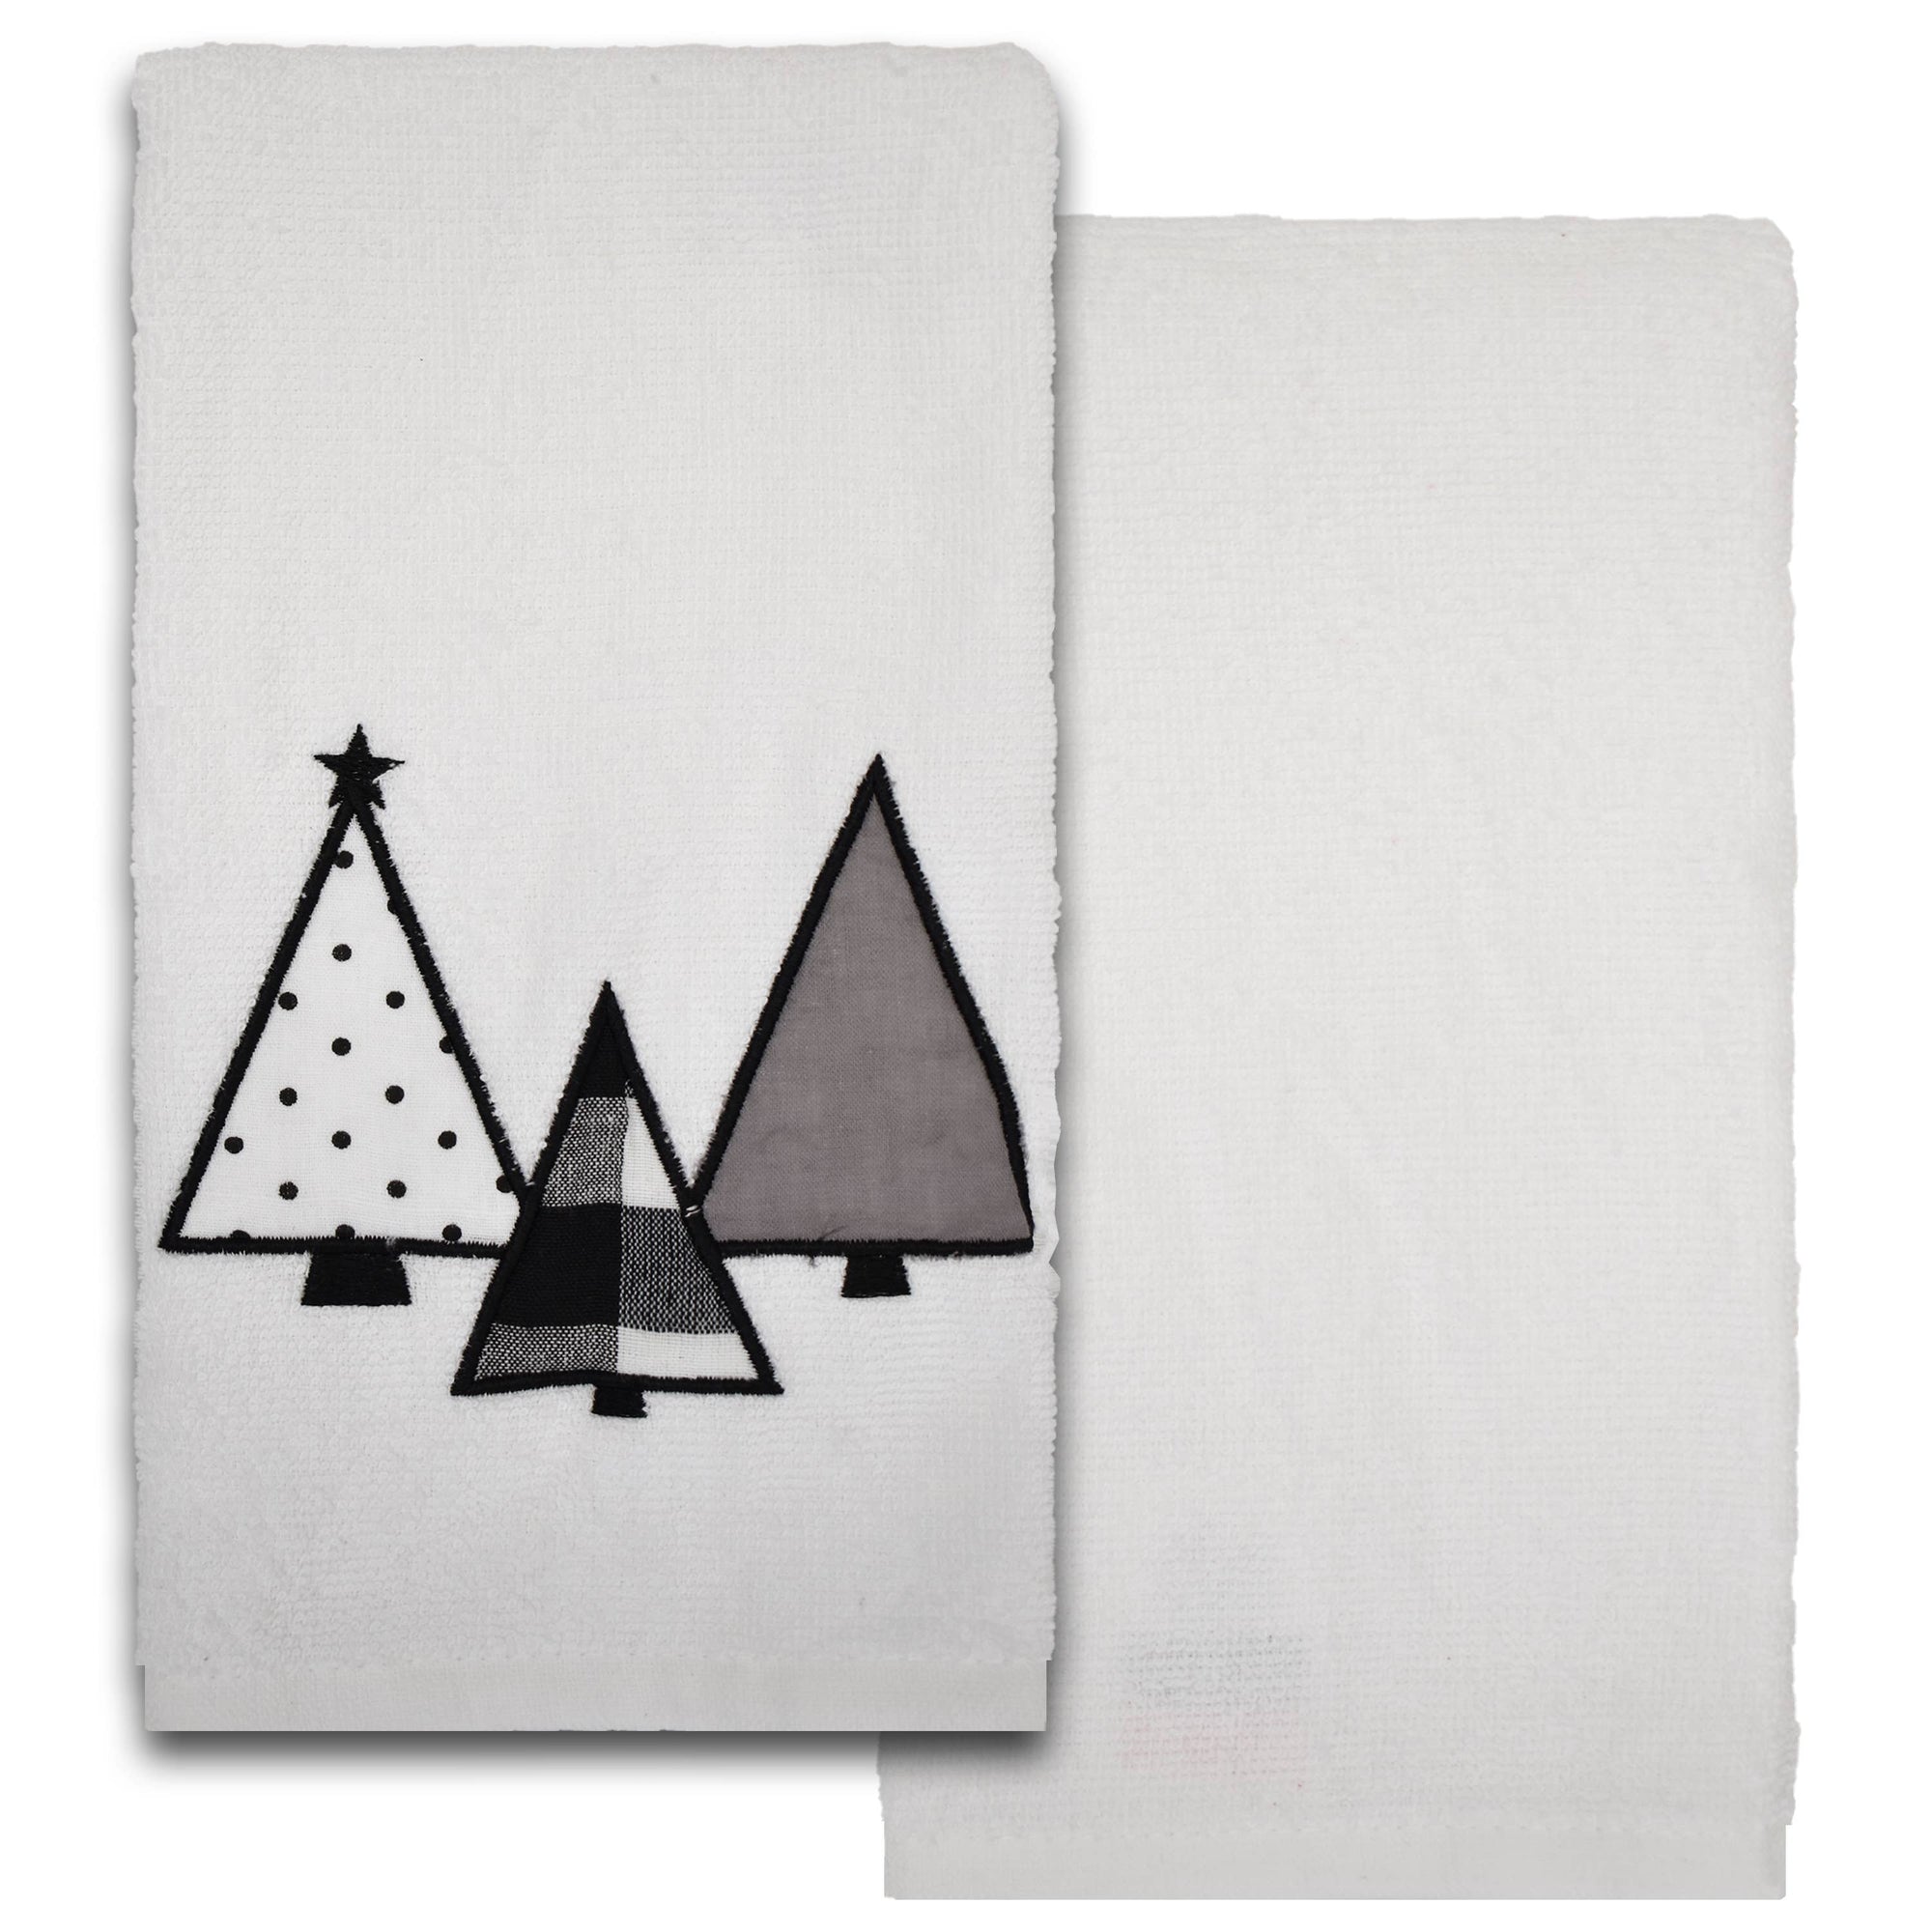 Hand Towels Set Of 2, Trees White, 24x16